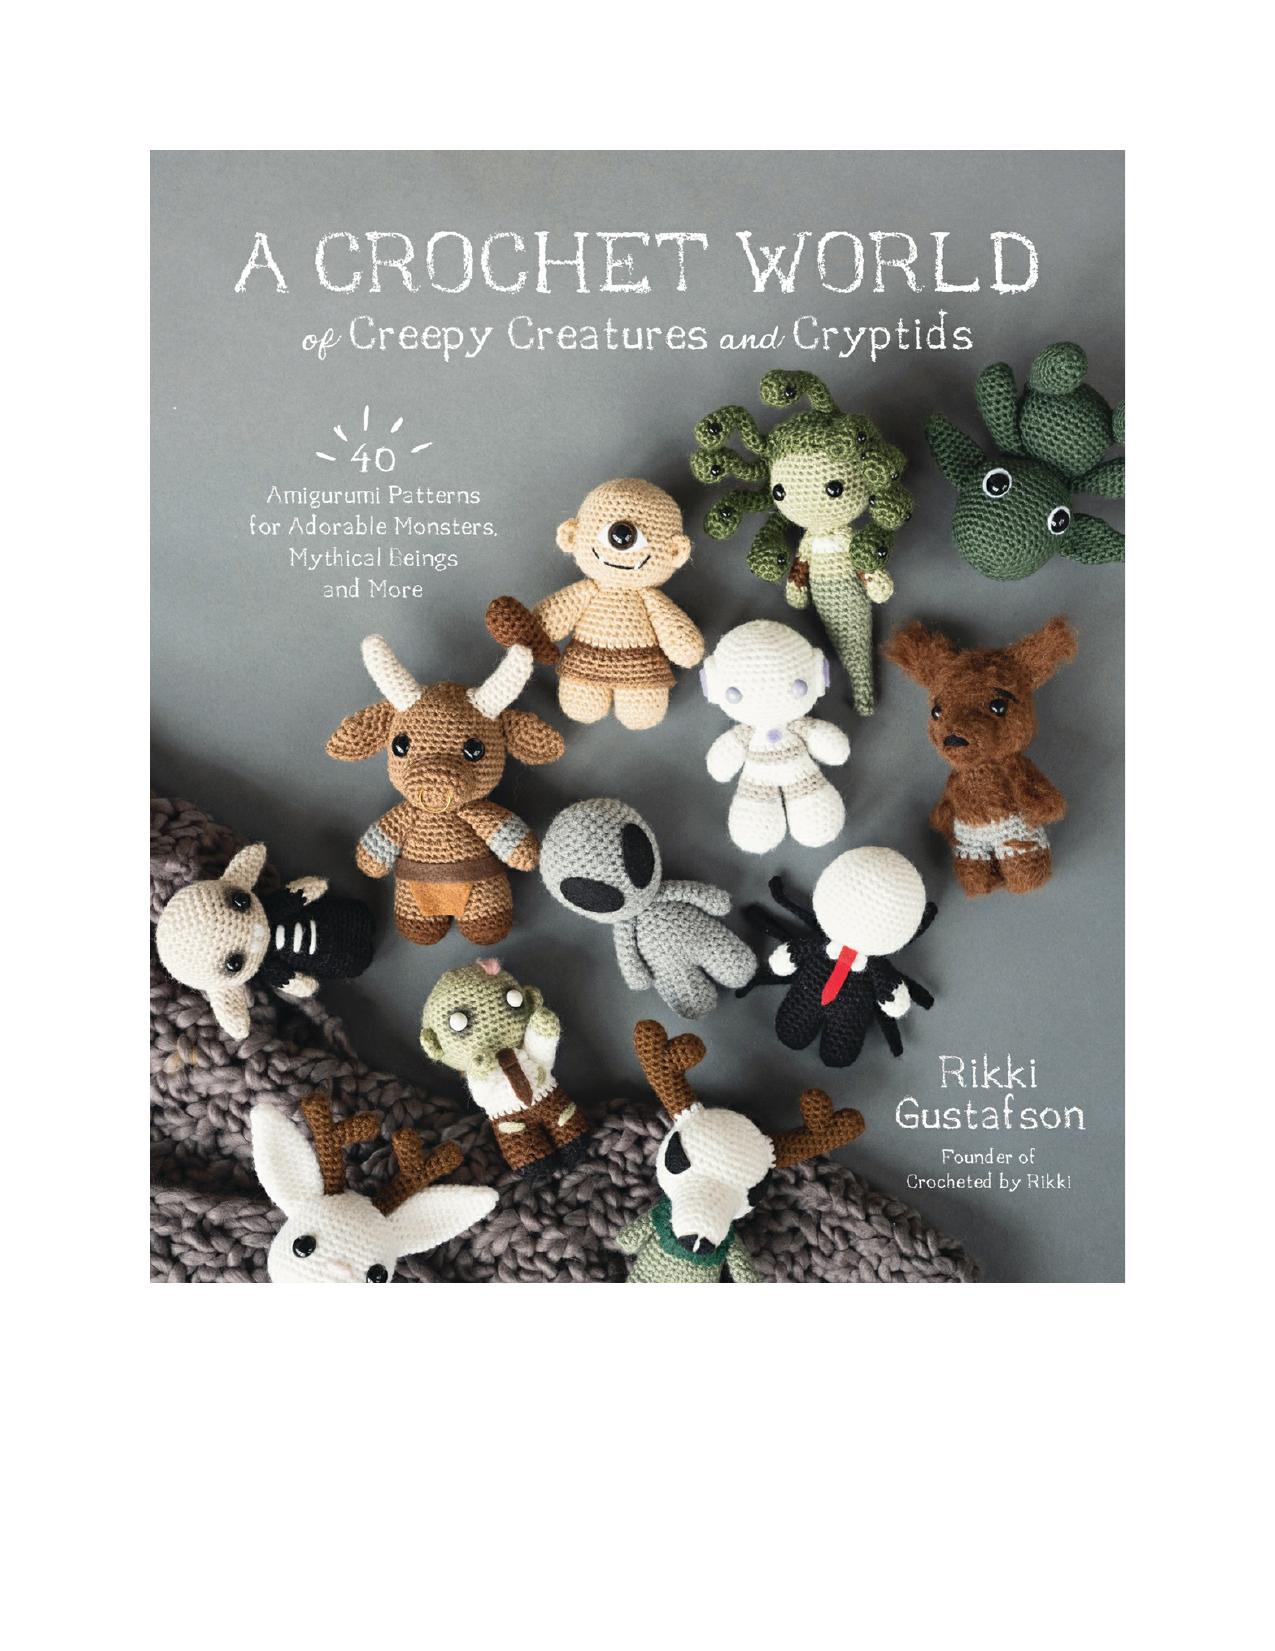 A Crochet World of Creepy Creatures and Cryptids by Rikki Gustafson